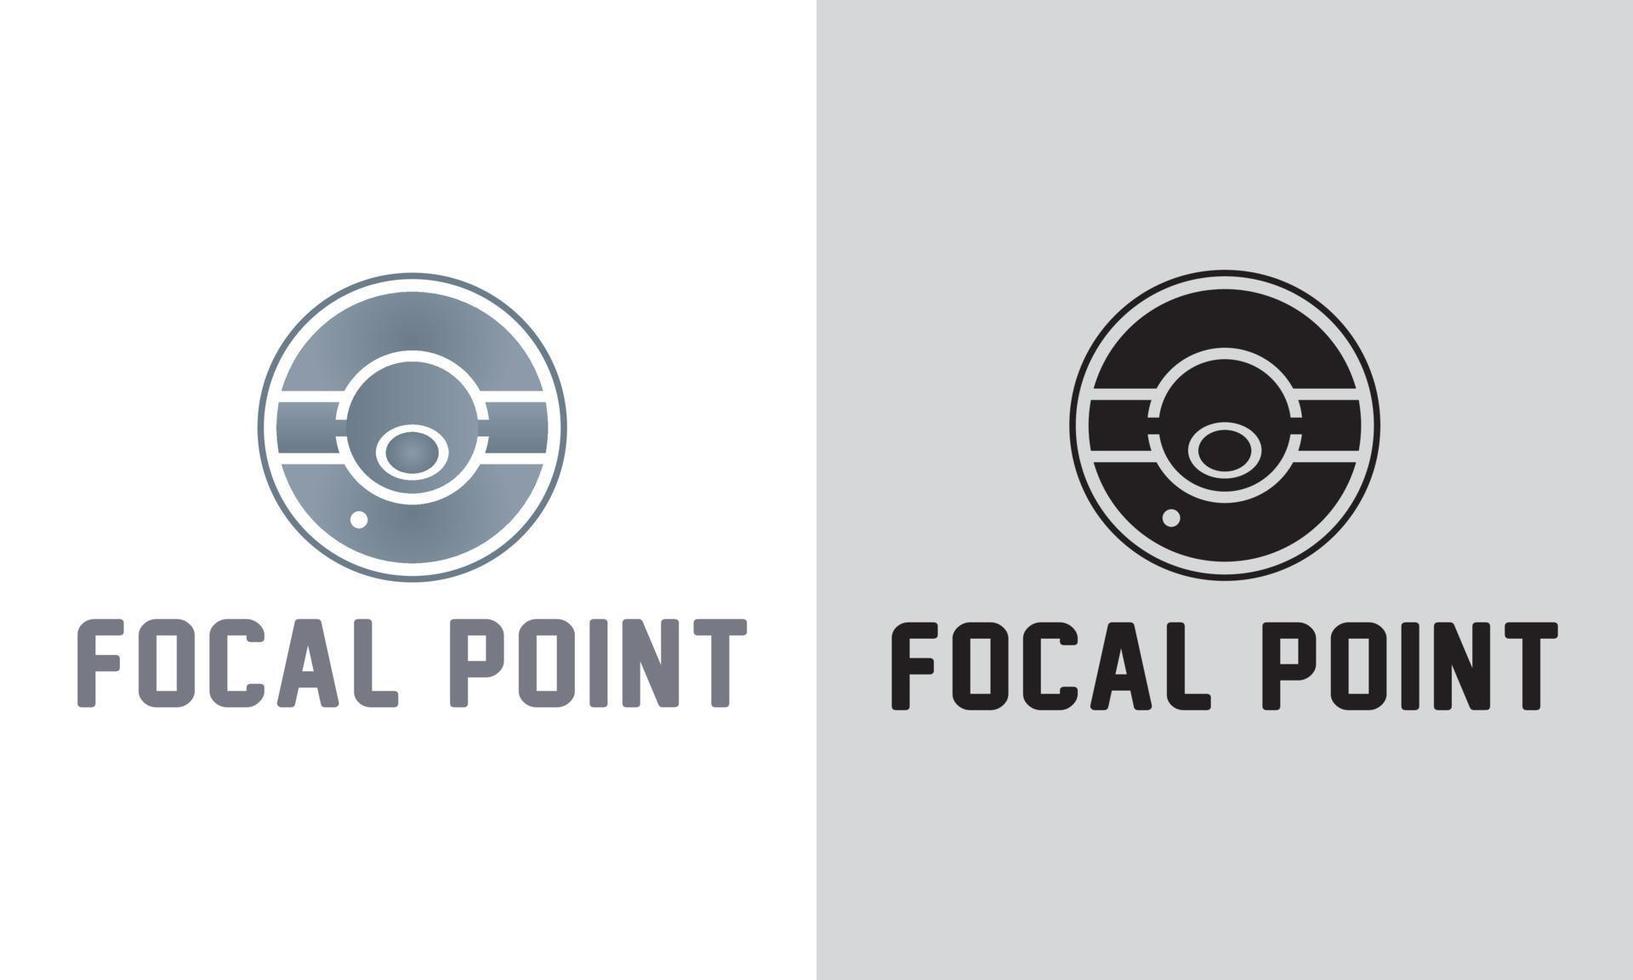 Focal point icons logo in flat design with elements for mobile concepts and web apps. vector